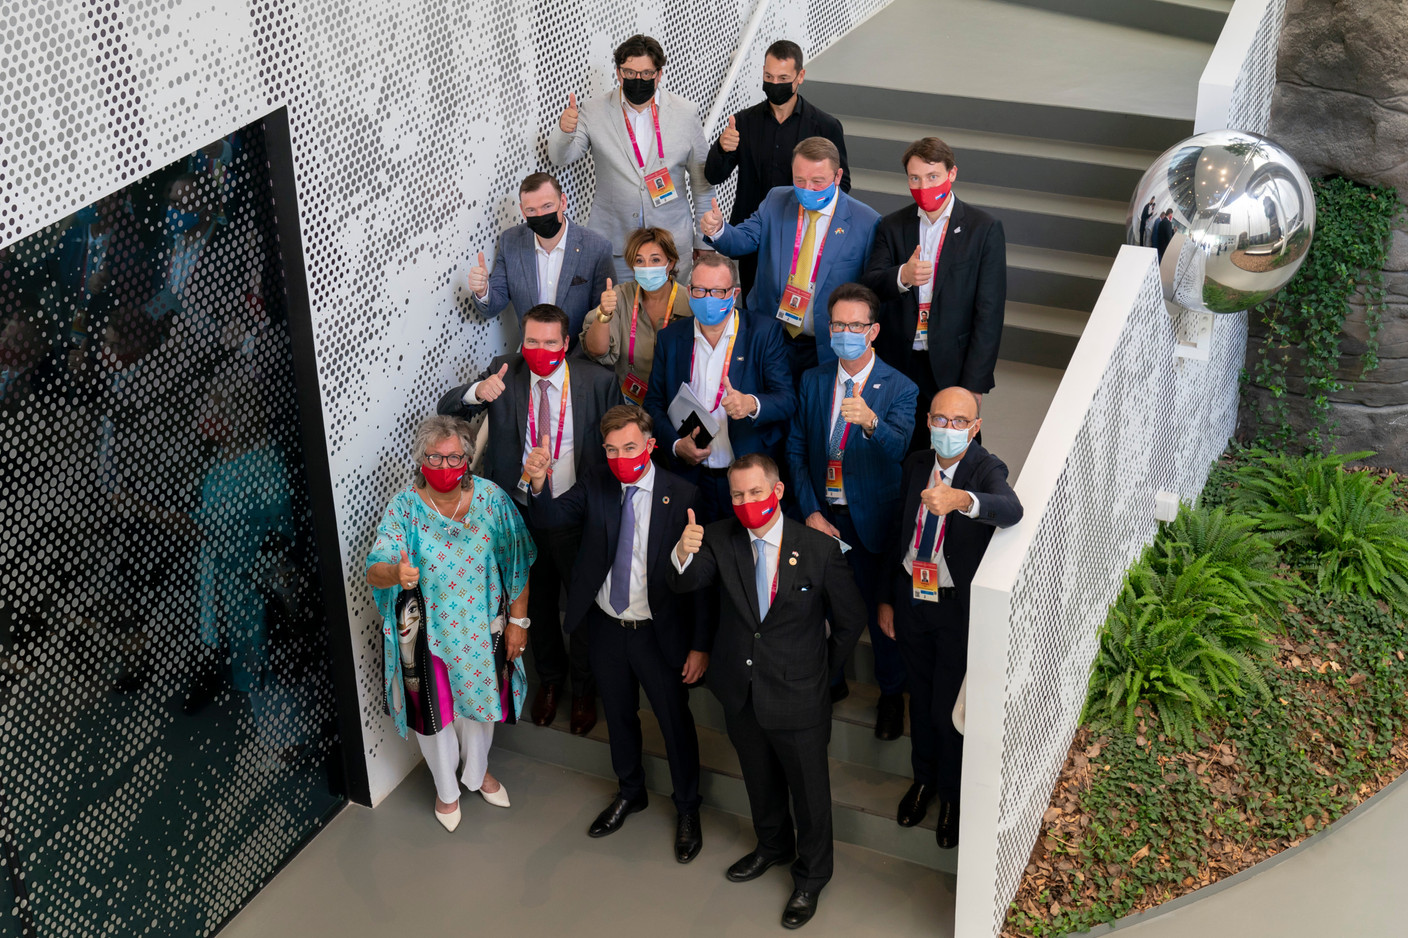 Minister Fayot surrounded by officials and sponsors of the Luxembourg pavilion in Dubai (Photo: SIP / Emmanuel Claude)